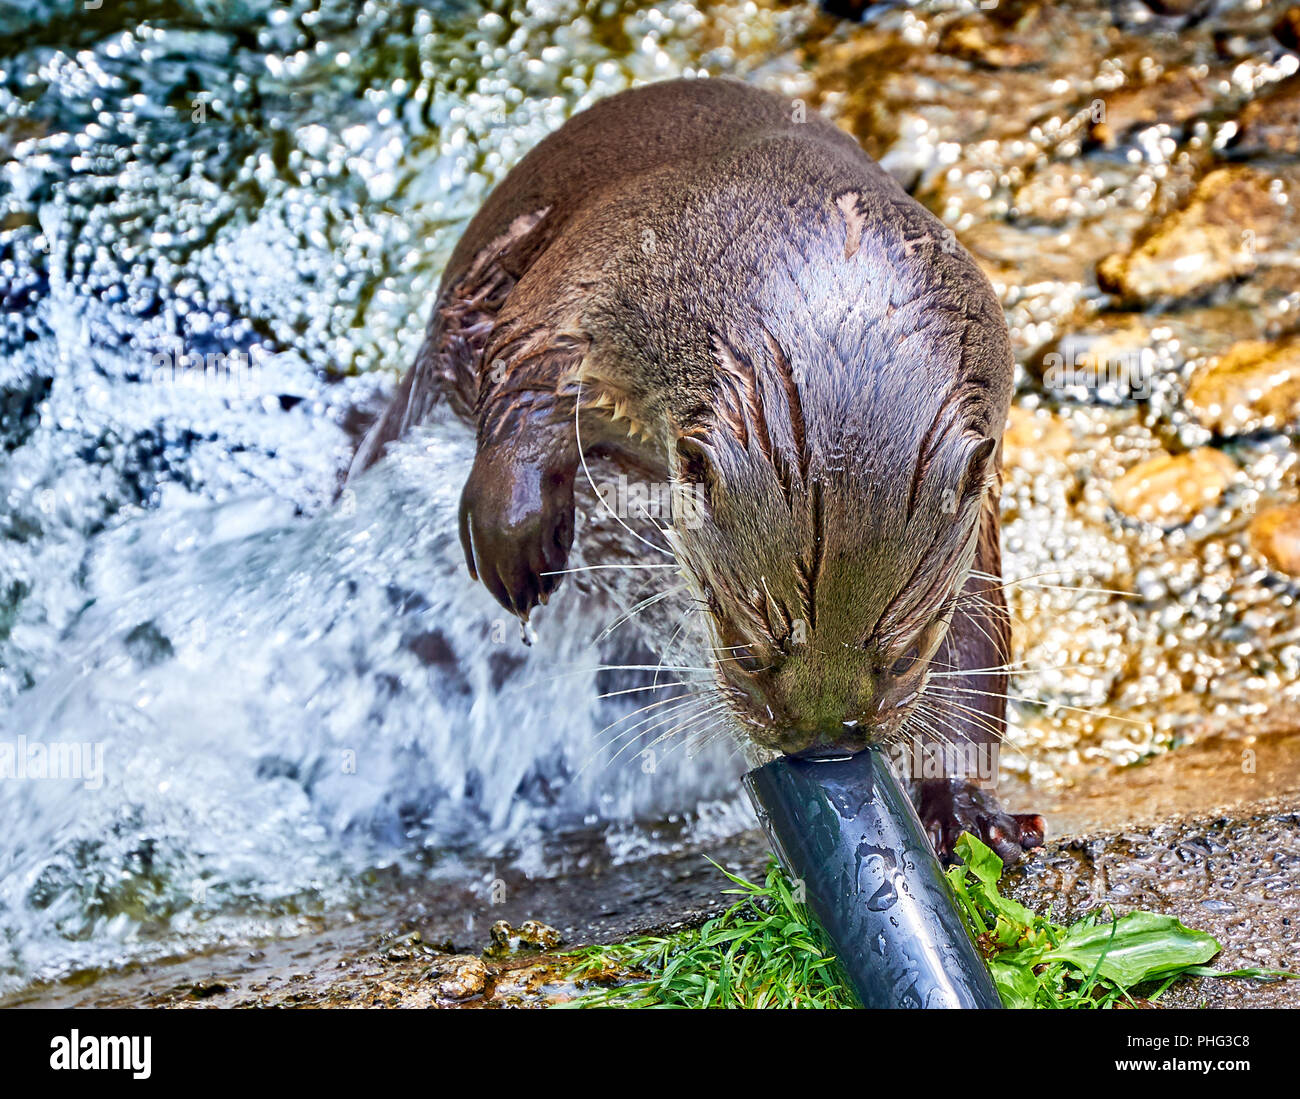 North American river otter (at a sanctuary) playing with water coming out of a hose Stock Photo